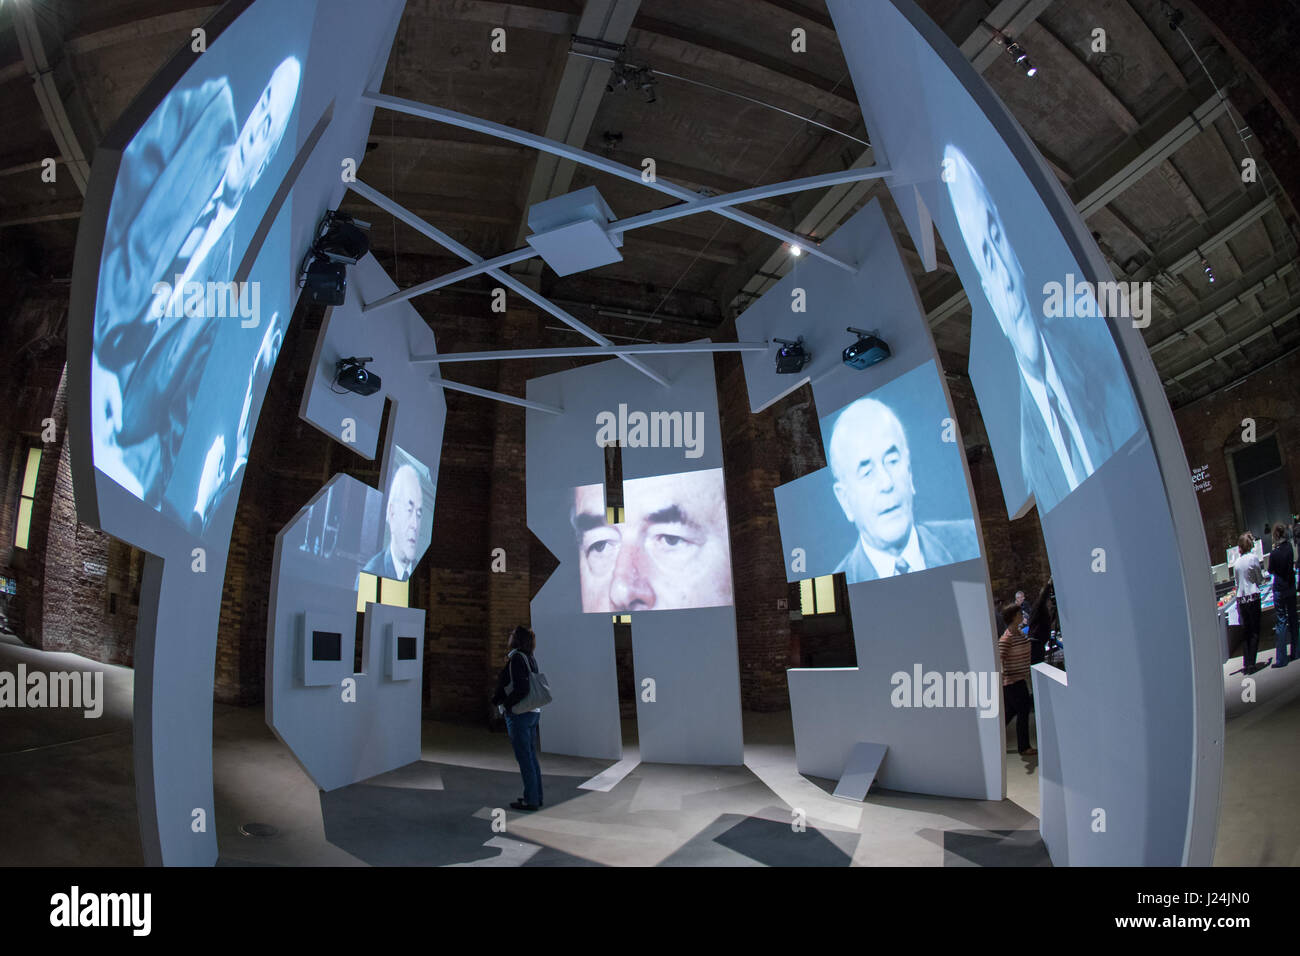 Nuremberg, Germany. 25th Apr, 2017. Projections of historical documents can be seen at the exhibition 'Albert Speer in der Bundesrepublik. Vom Umgang mit deutscher Vergangenheit' (lit. 'Albert Speer in the Federal Republic. On handling German past' at the Dokumentationszentrum Reichsparteigelaende (lit. 'Documentation Center Reichs Party Grounds') in Nuremberg, Germany, 25 April 2017. Using historical documents, the exhibition wants to proof that Speer was not, as assumed, an apolitical technocrate who did not know about the crimes of the Nazis. Photo: Daniel Karmann/dpa/Alamy Live News Stock Photo